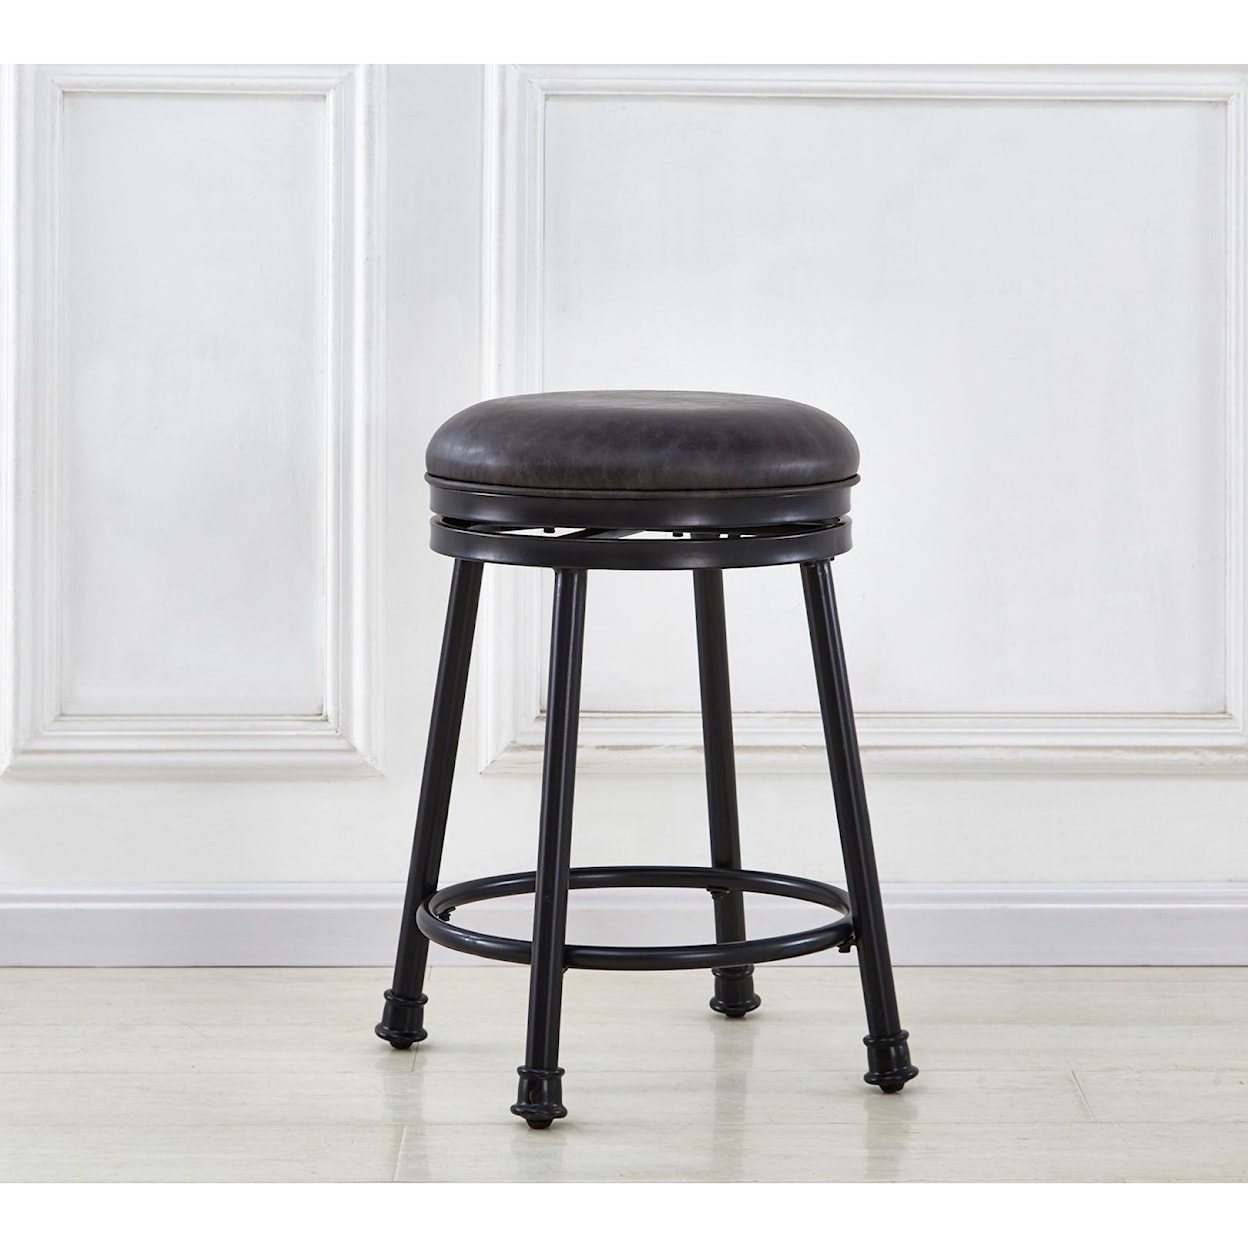 Steve Silver Claire Swivel Counter Stool